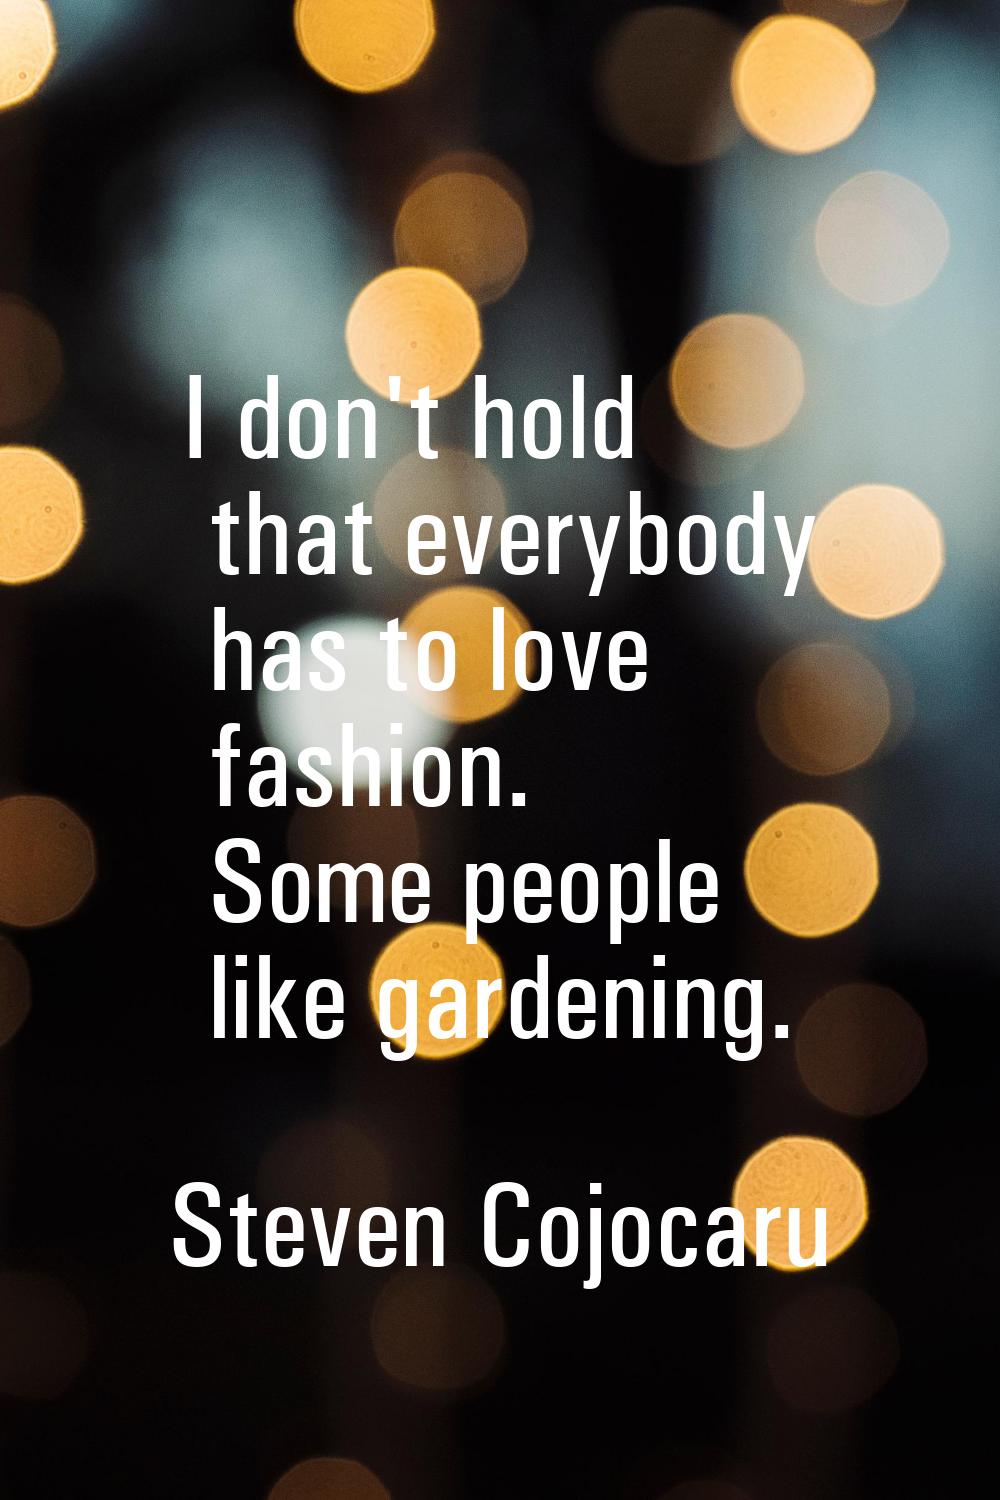 I don't hold that everybody has to love fashion. Some people like gardening.